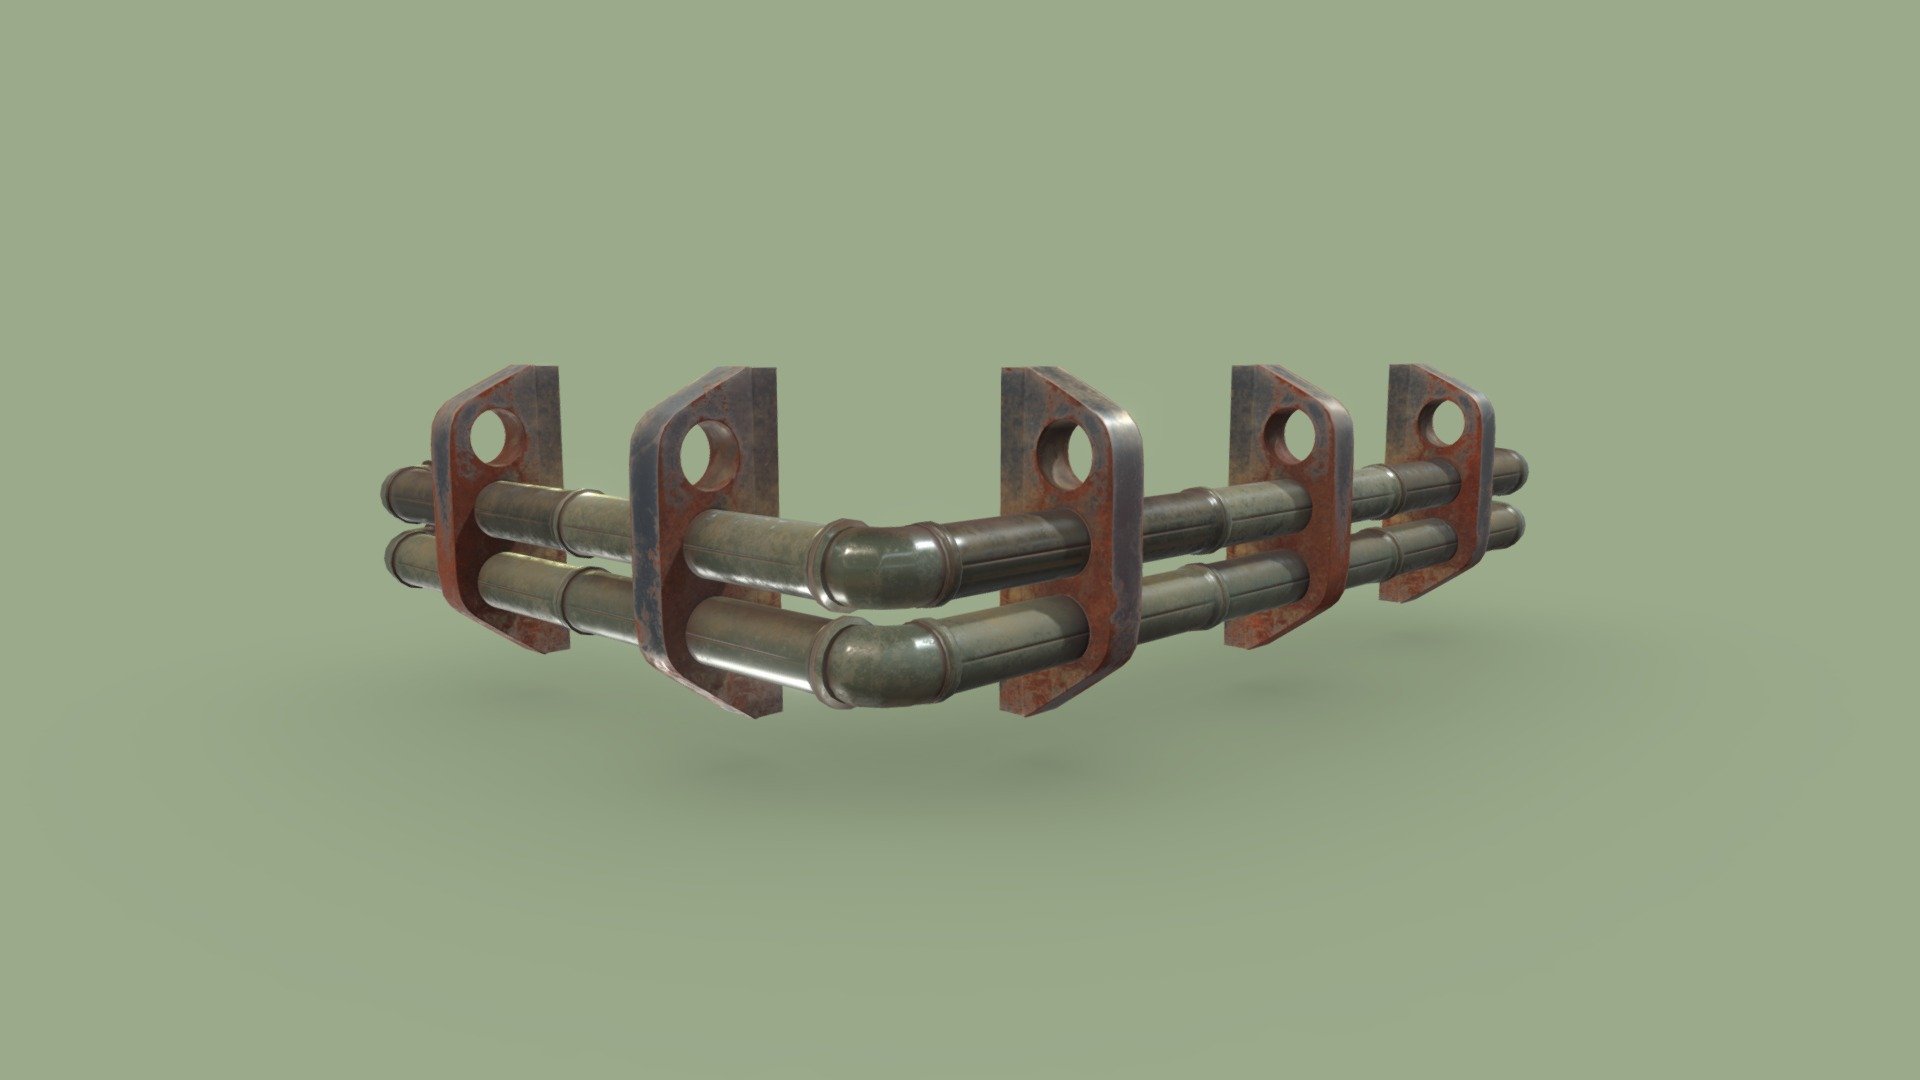 This is an MMLX environment asset designed to work within the dungeon ruins of the Mega Man Legends universe. As seen in the concept art, this is a pair of pipes, designed to be modular and wrap around a right angle corner.

The asset provided here is the high res game asset. That includes the textures. Feel free to download and use for your projects. Please credit PSYCHOPOMP and/or JJ Chalupnik for the modeling/texturing if you decide to use it.

Learn more about the fan project here: https://psychopomp-studios.com/mmlx/ - Double Pipe Corner - Download Free 3D model by TUGBOAT GAMES (@TugboatGames) 3d model